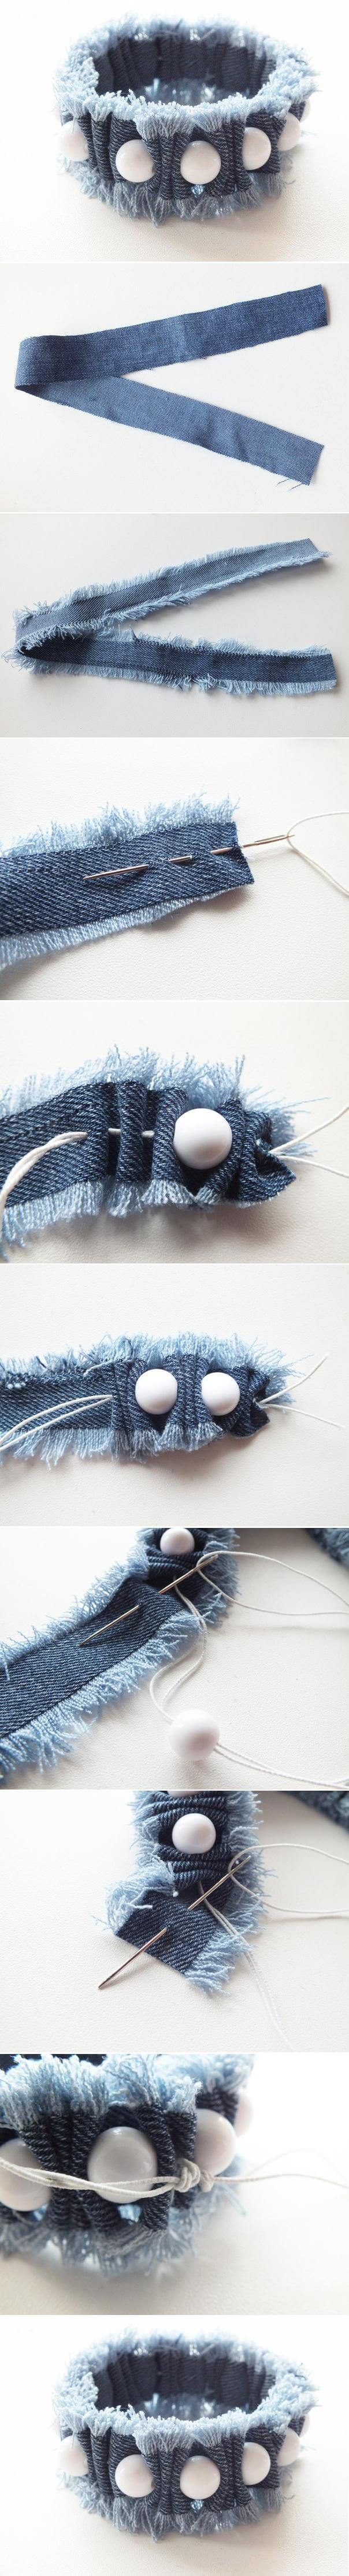 diy-old-jeans-bracelet DIY Clever Projects from OLD DENIM JEANS - Step by step tutorial